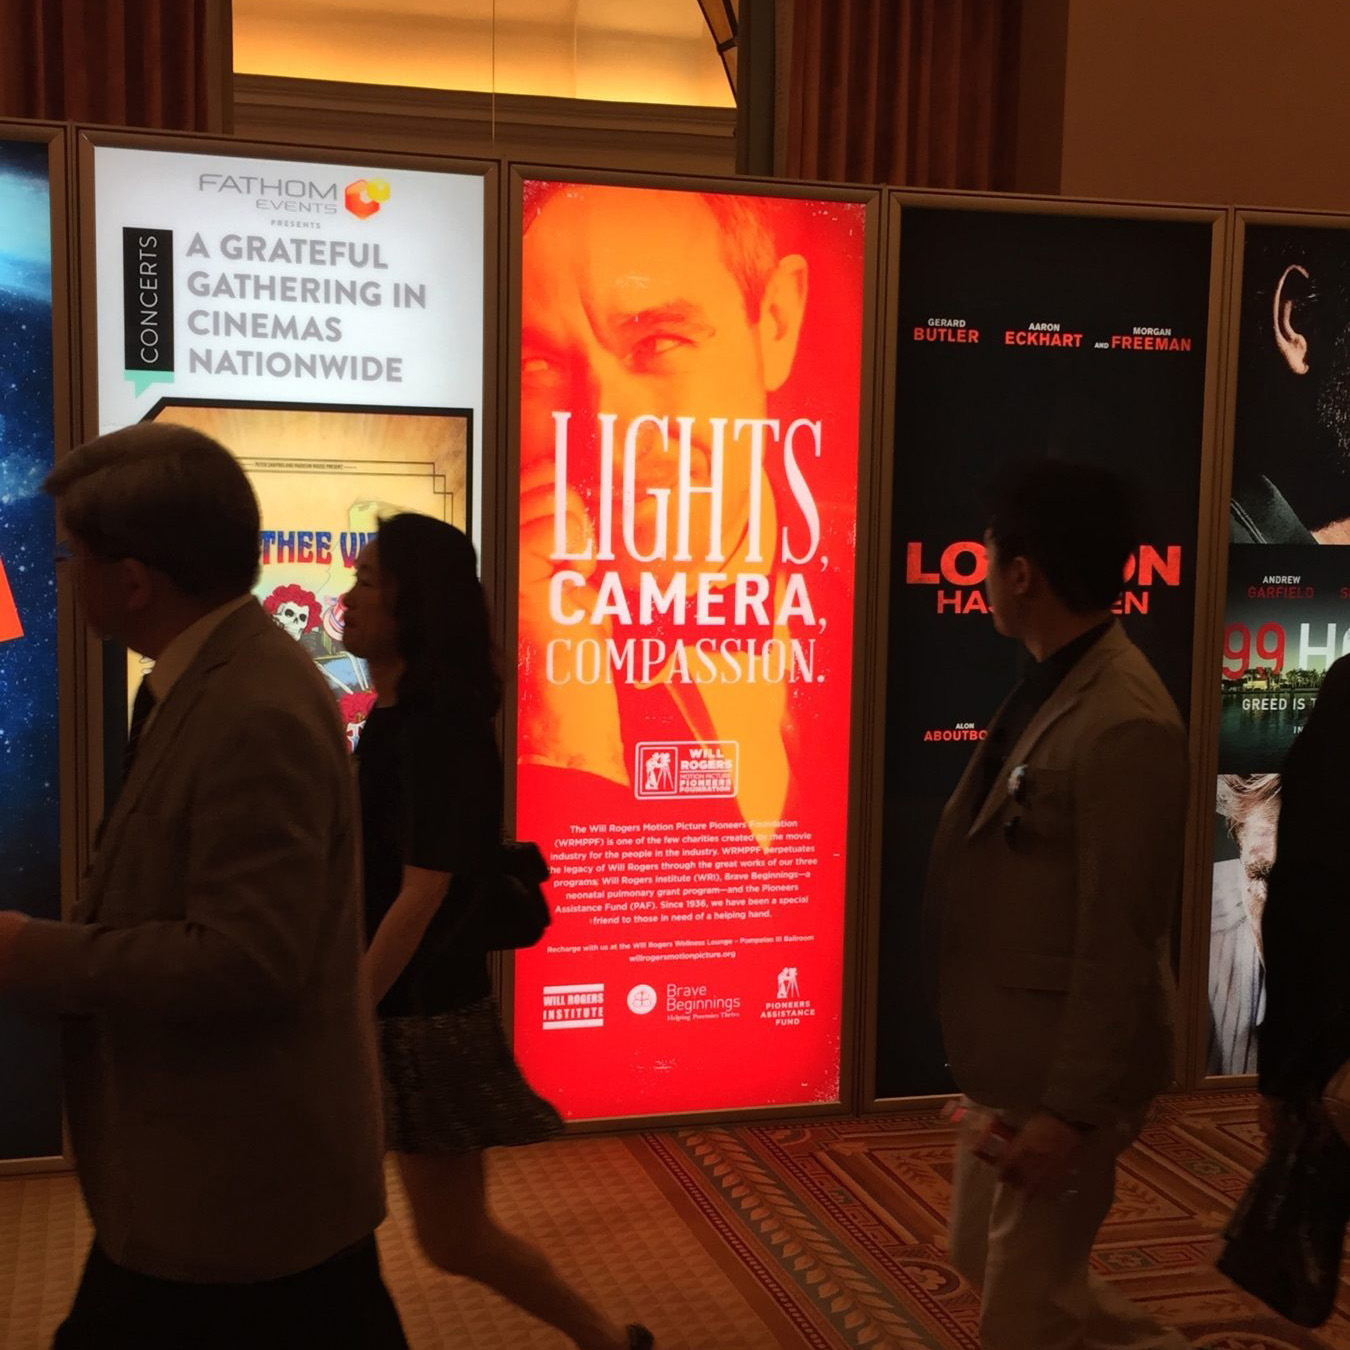 Backlit out of home kiosk with headline "Lights Camera Compassion"